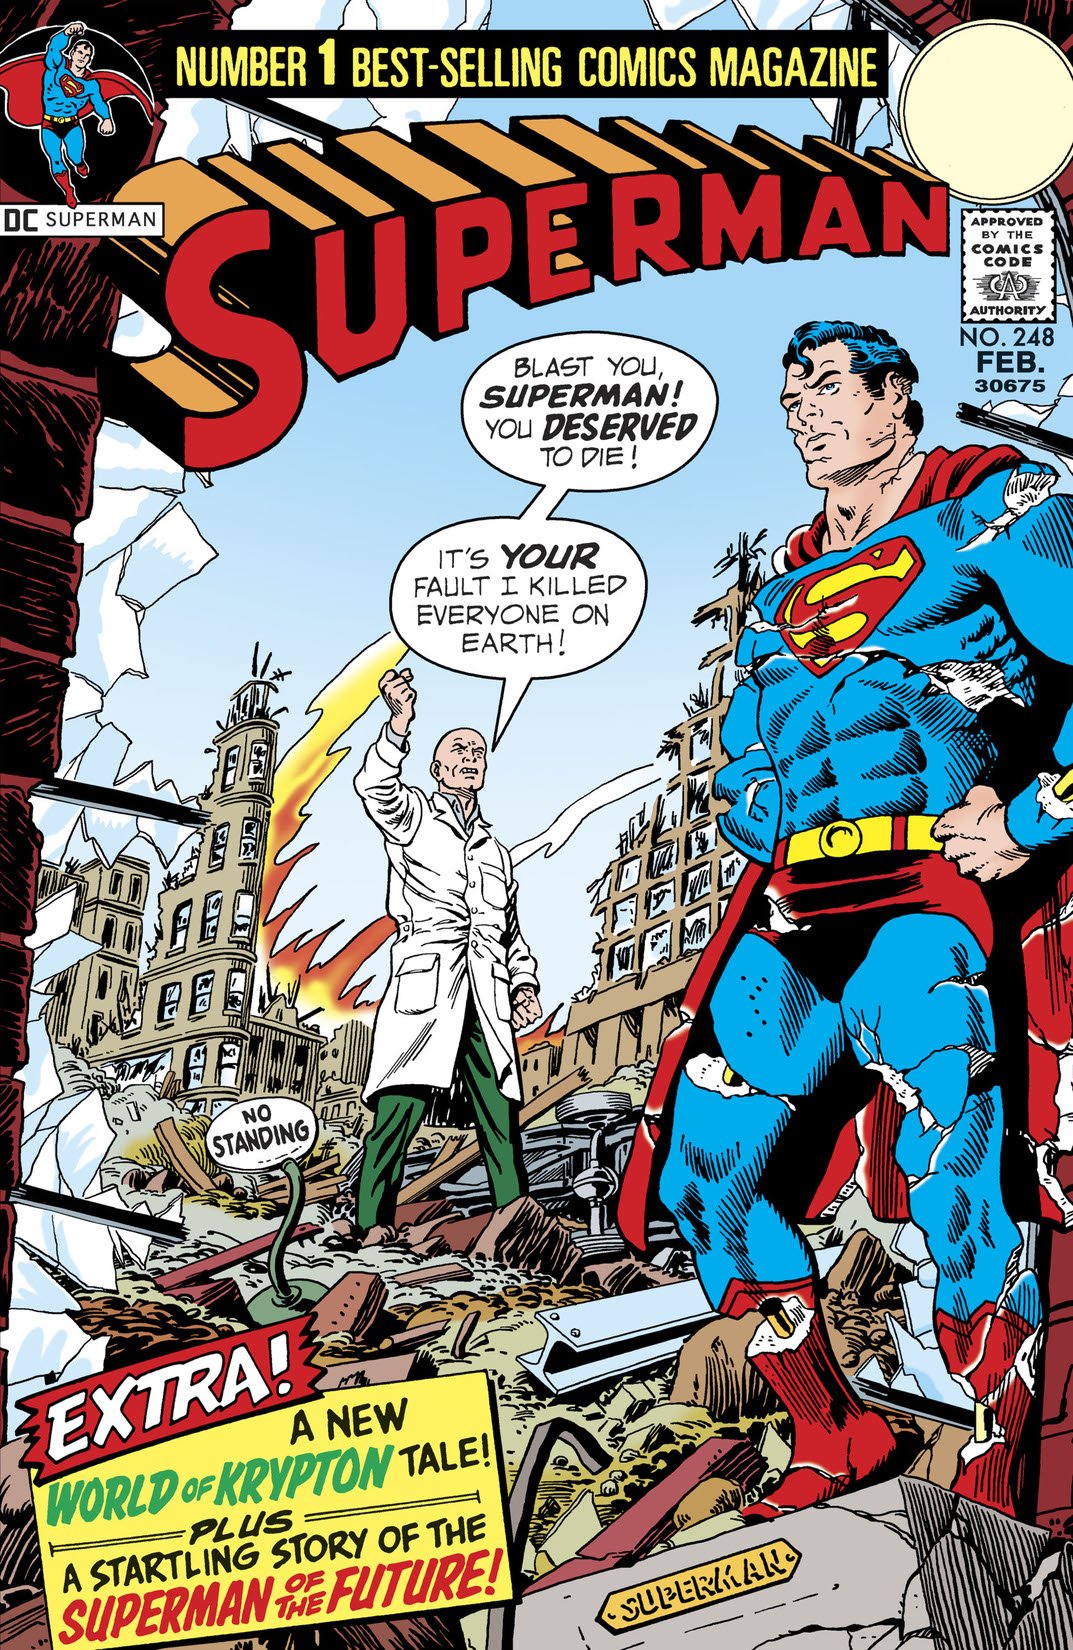 Superman (1939-) #248 preview images